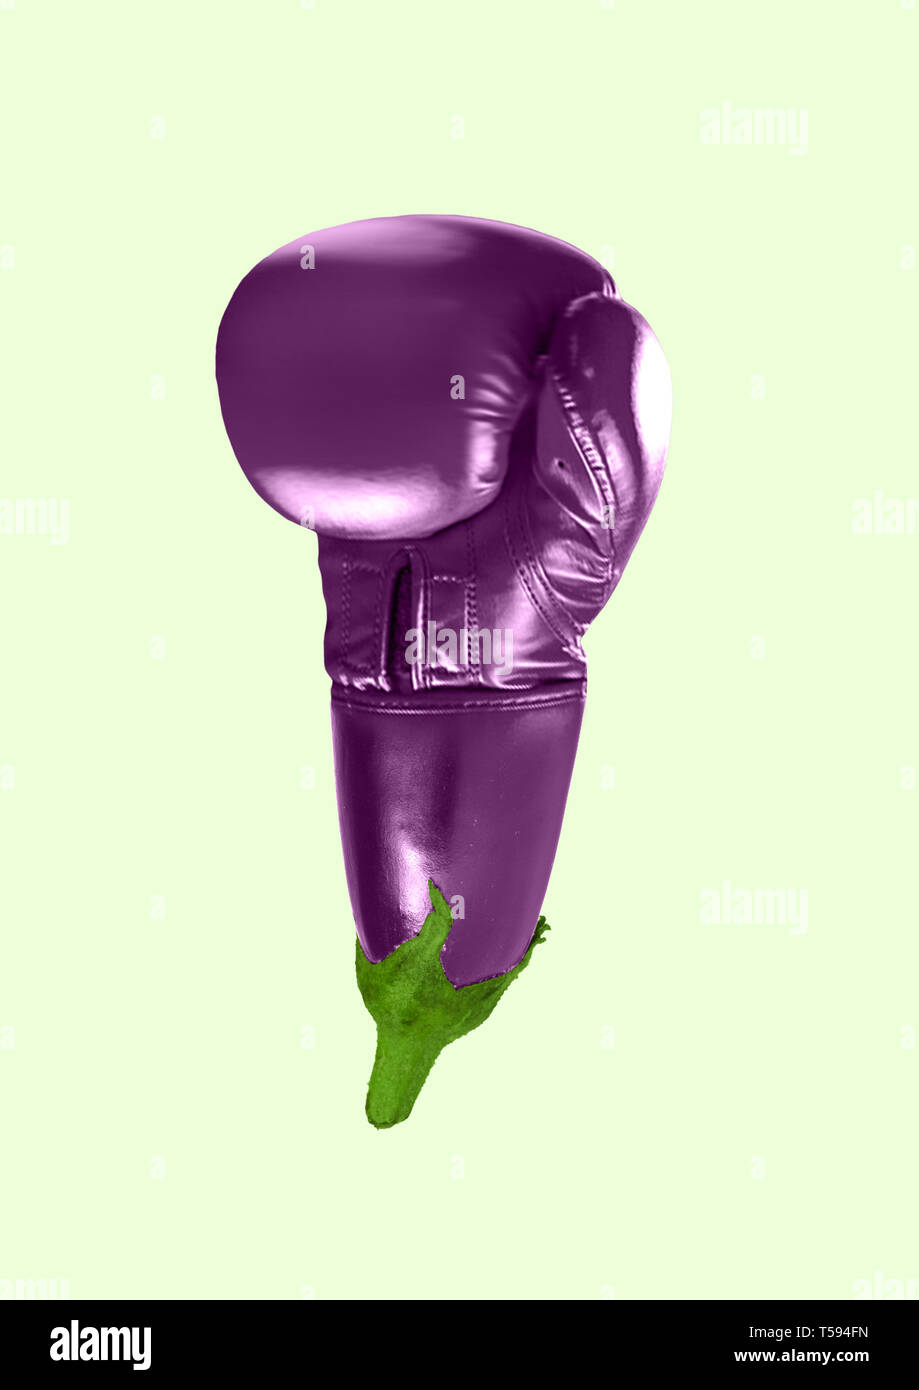 An alternative sport or hematoma. A boxing glove as an eggplant on green background. Negative space to insert your text. Modern design. Contemporary art collage. Concept of food, movement, plants. Stock Photo